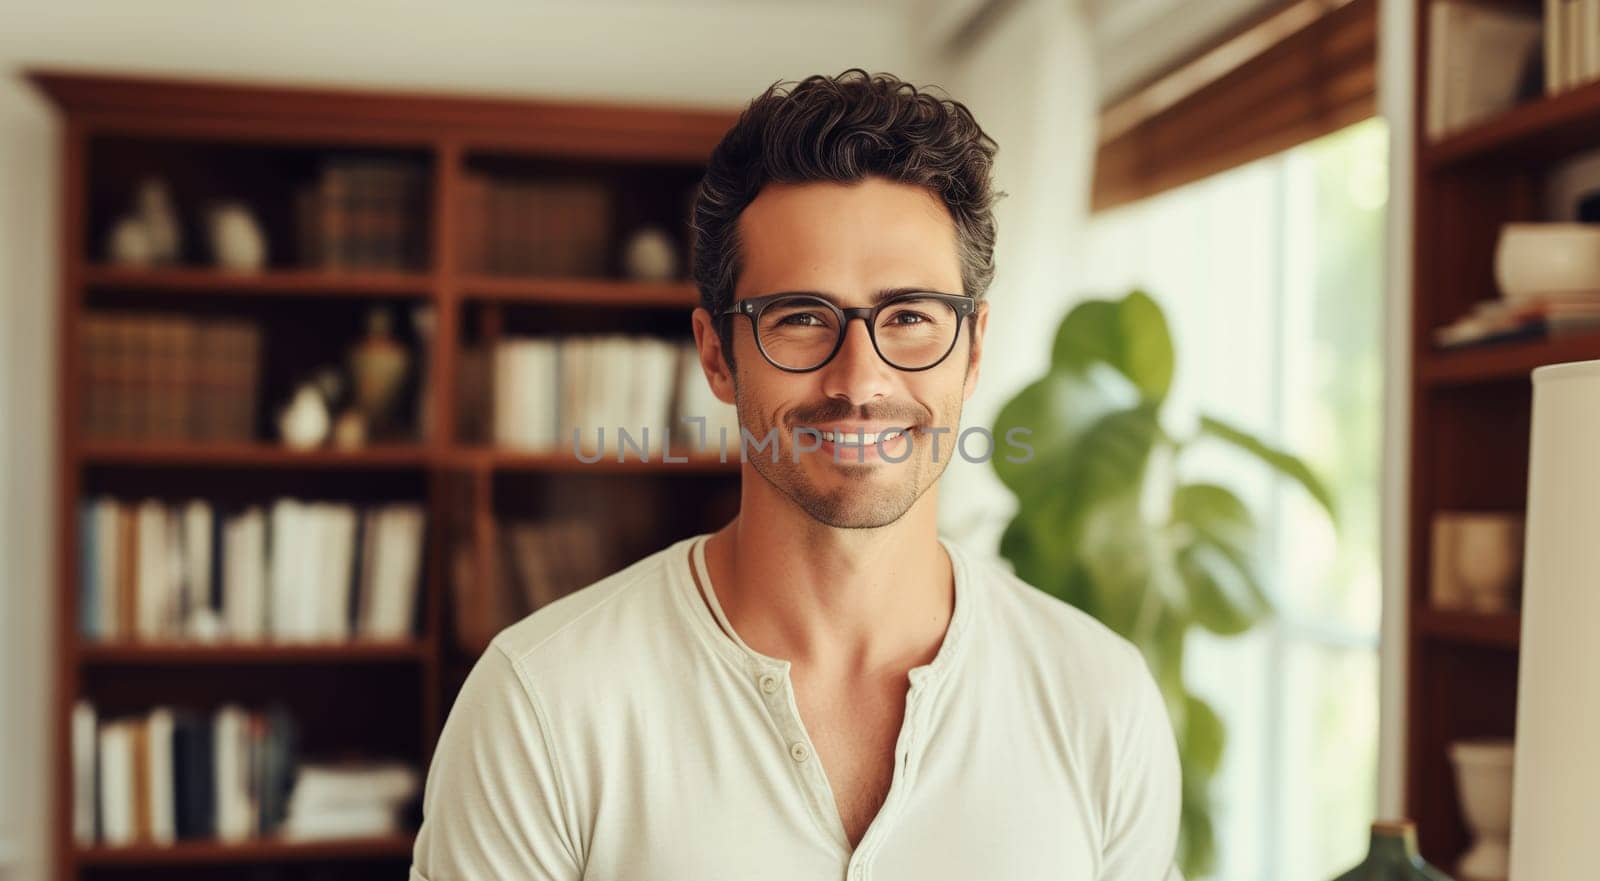 Portrait of handsome happy smiling bearded young man in glasses looking at camera standing in home interior